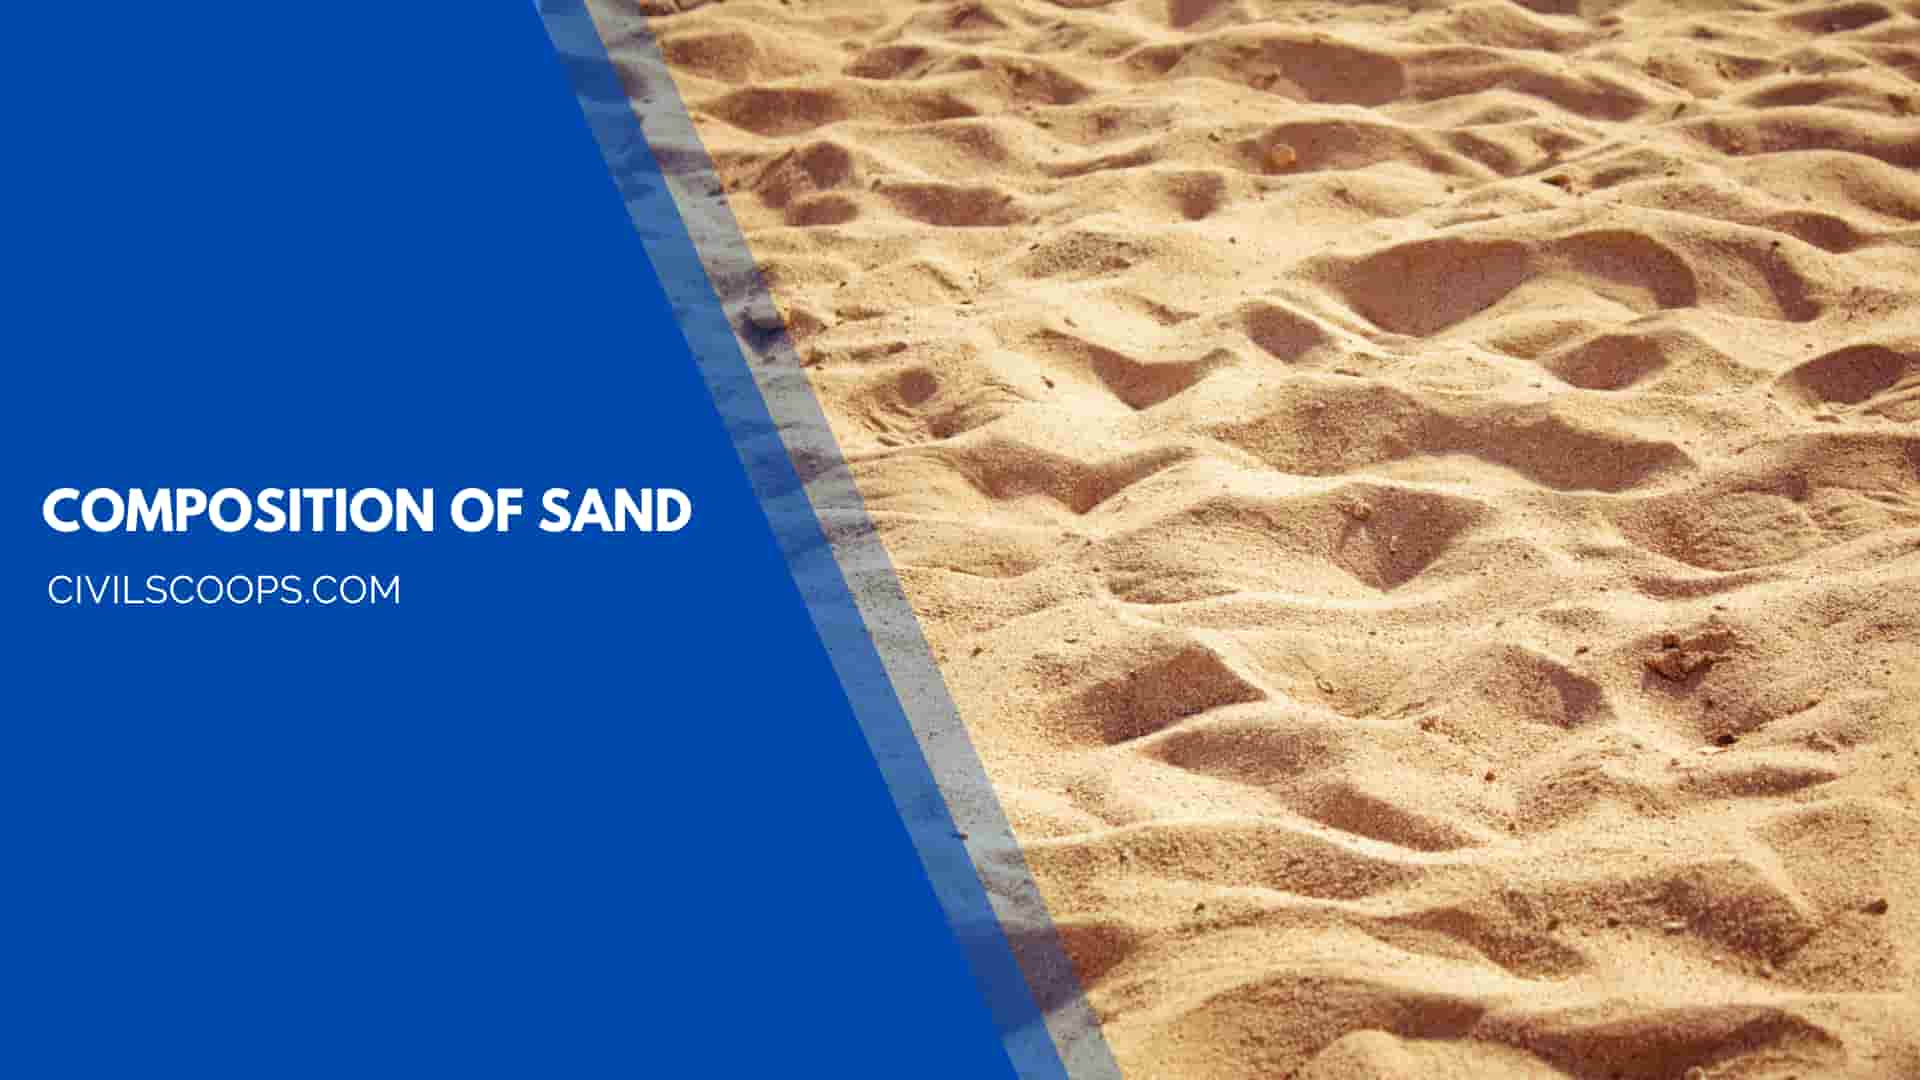 Composition of Sand